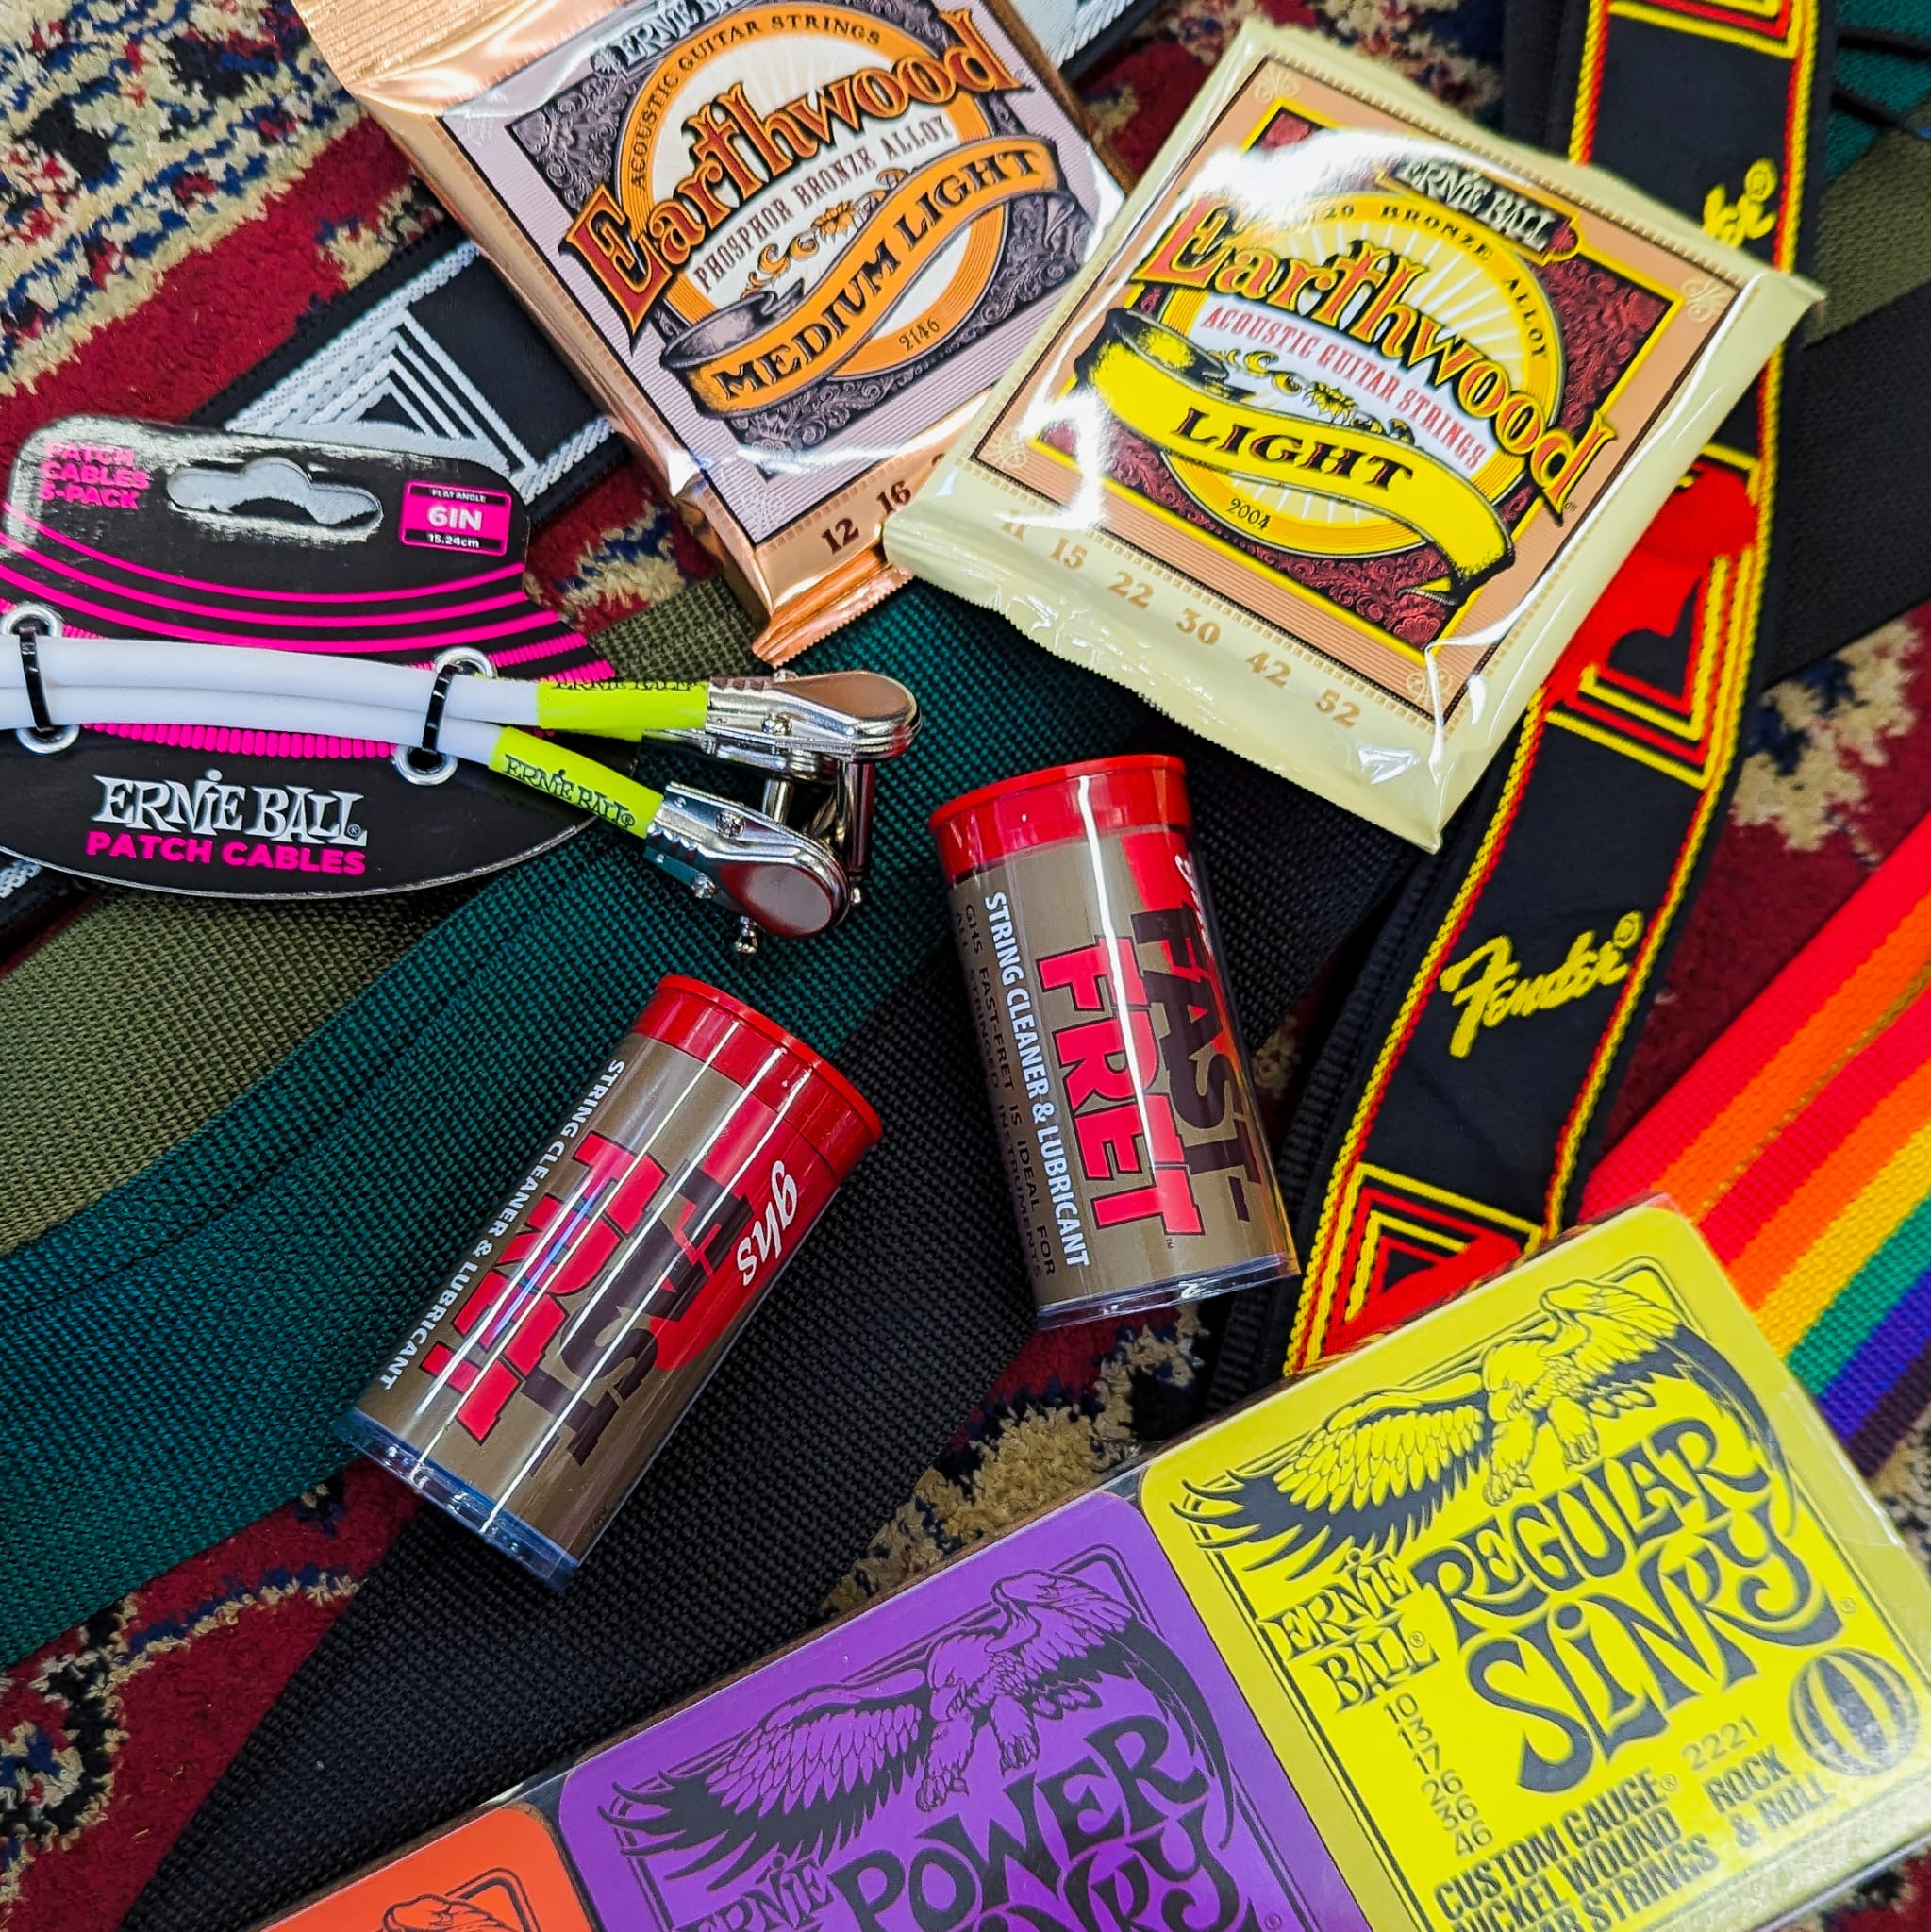 Ernie Ball Goodies In Stock!